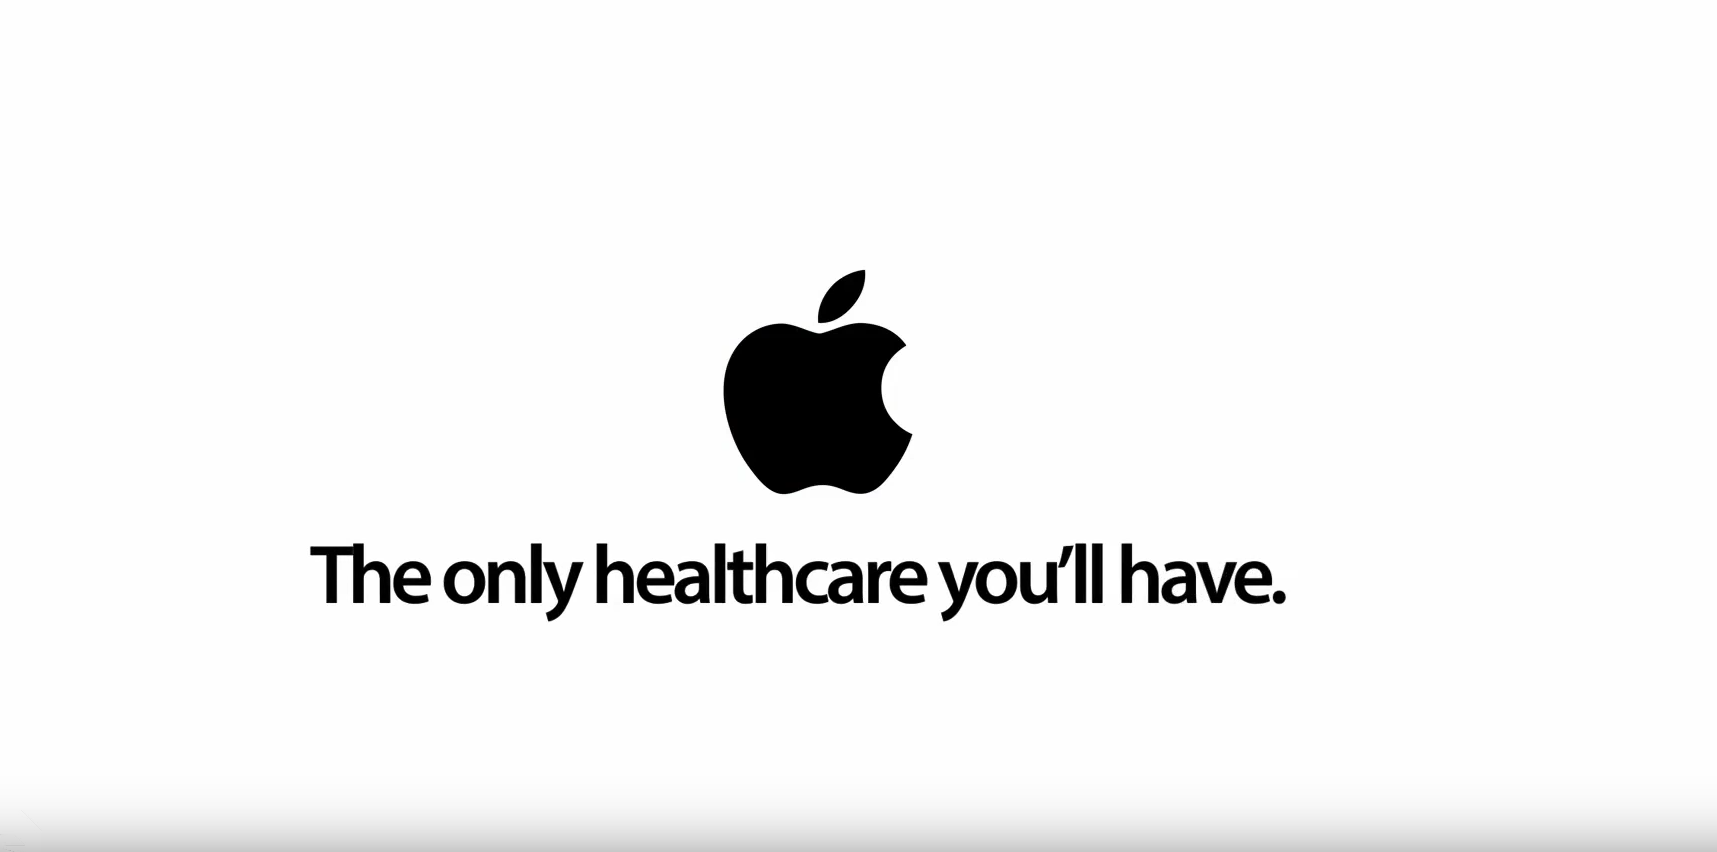 Apple Forges New Future for Customer-Centric Healthcare | The Healthcare Technology Report.